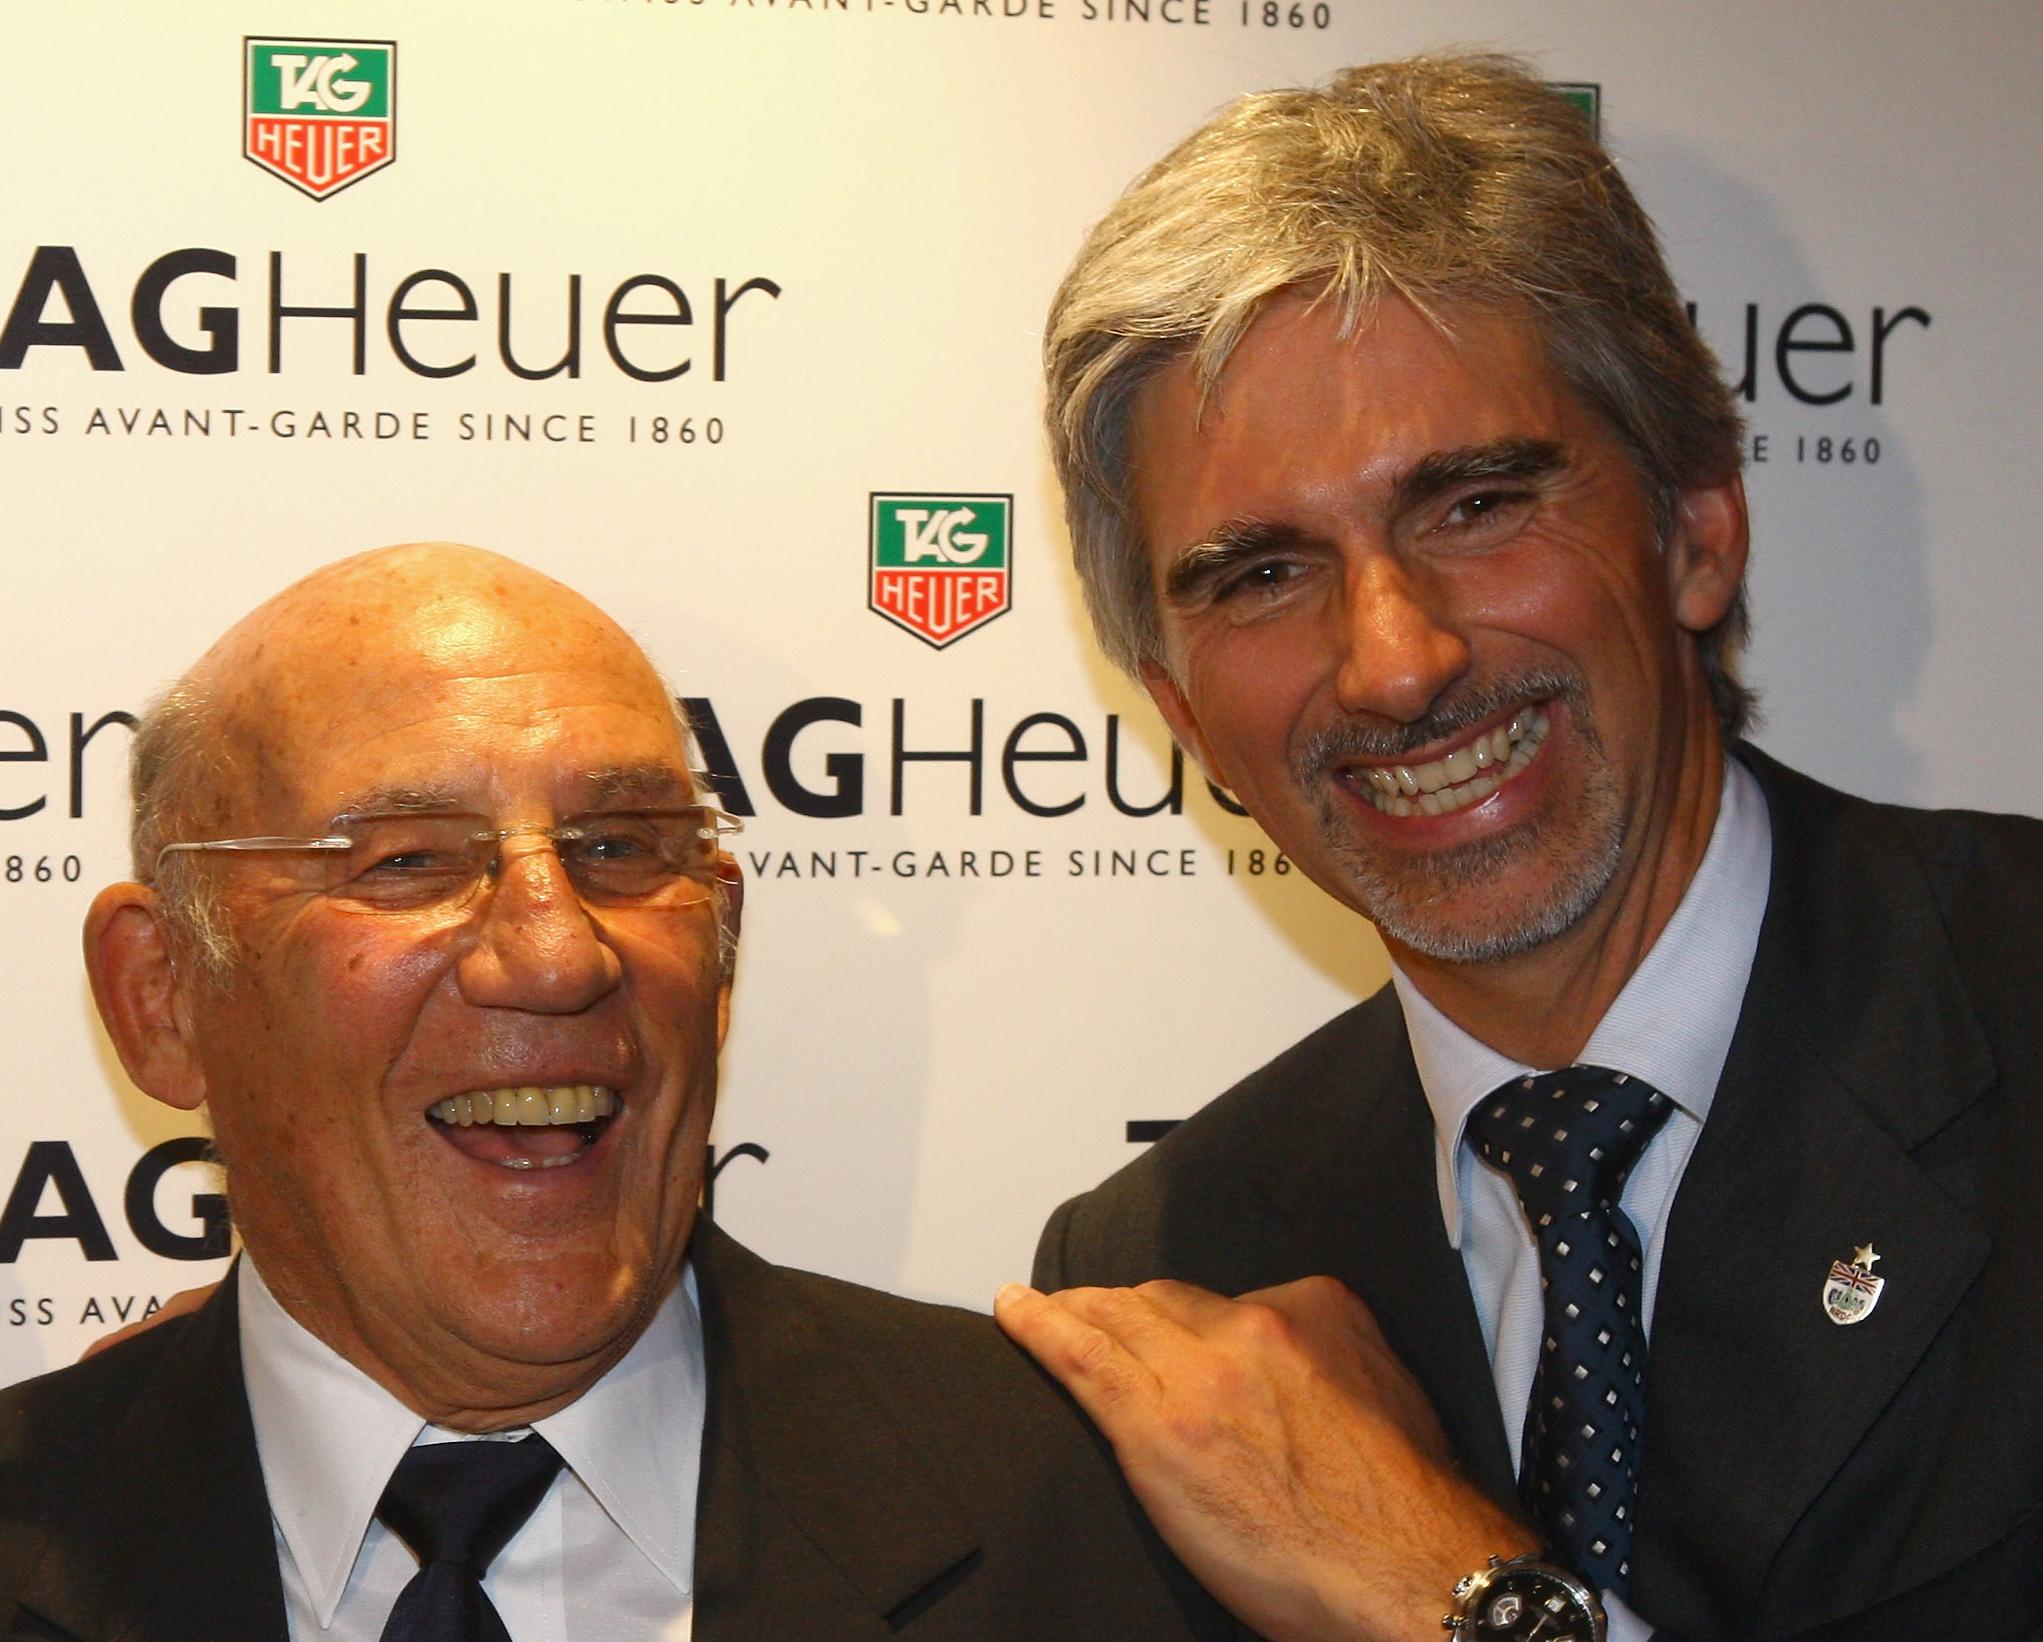 Two British F1 legends celebrate their birthdays today.  Happy Birthday to Stirling Moss (85) and Damon Hill (54)! 